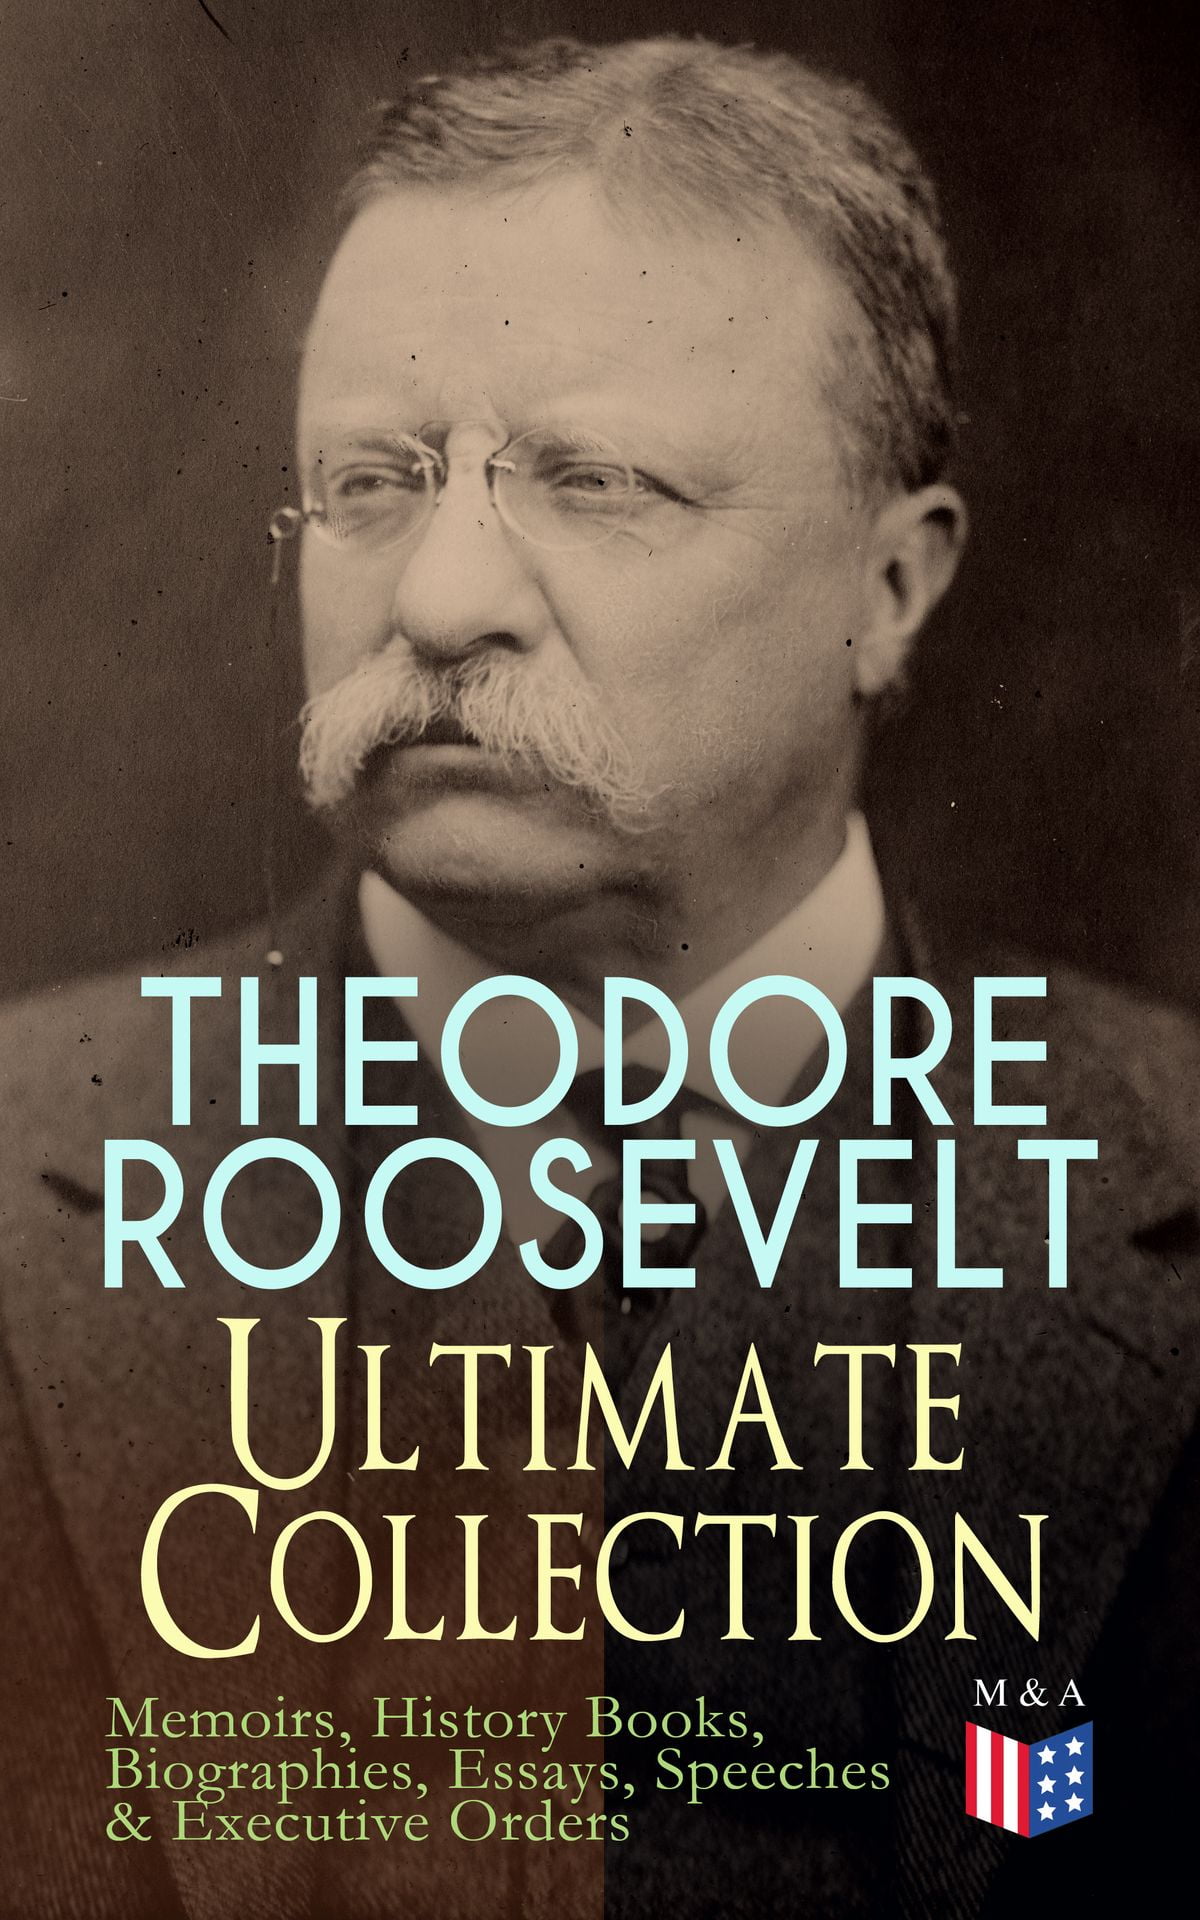 theodore roosevelt biography book